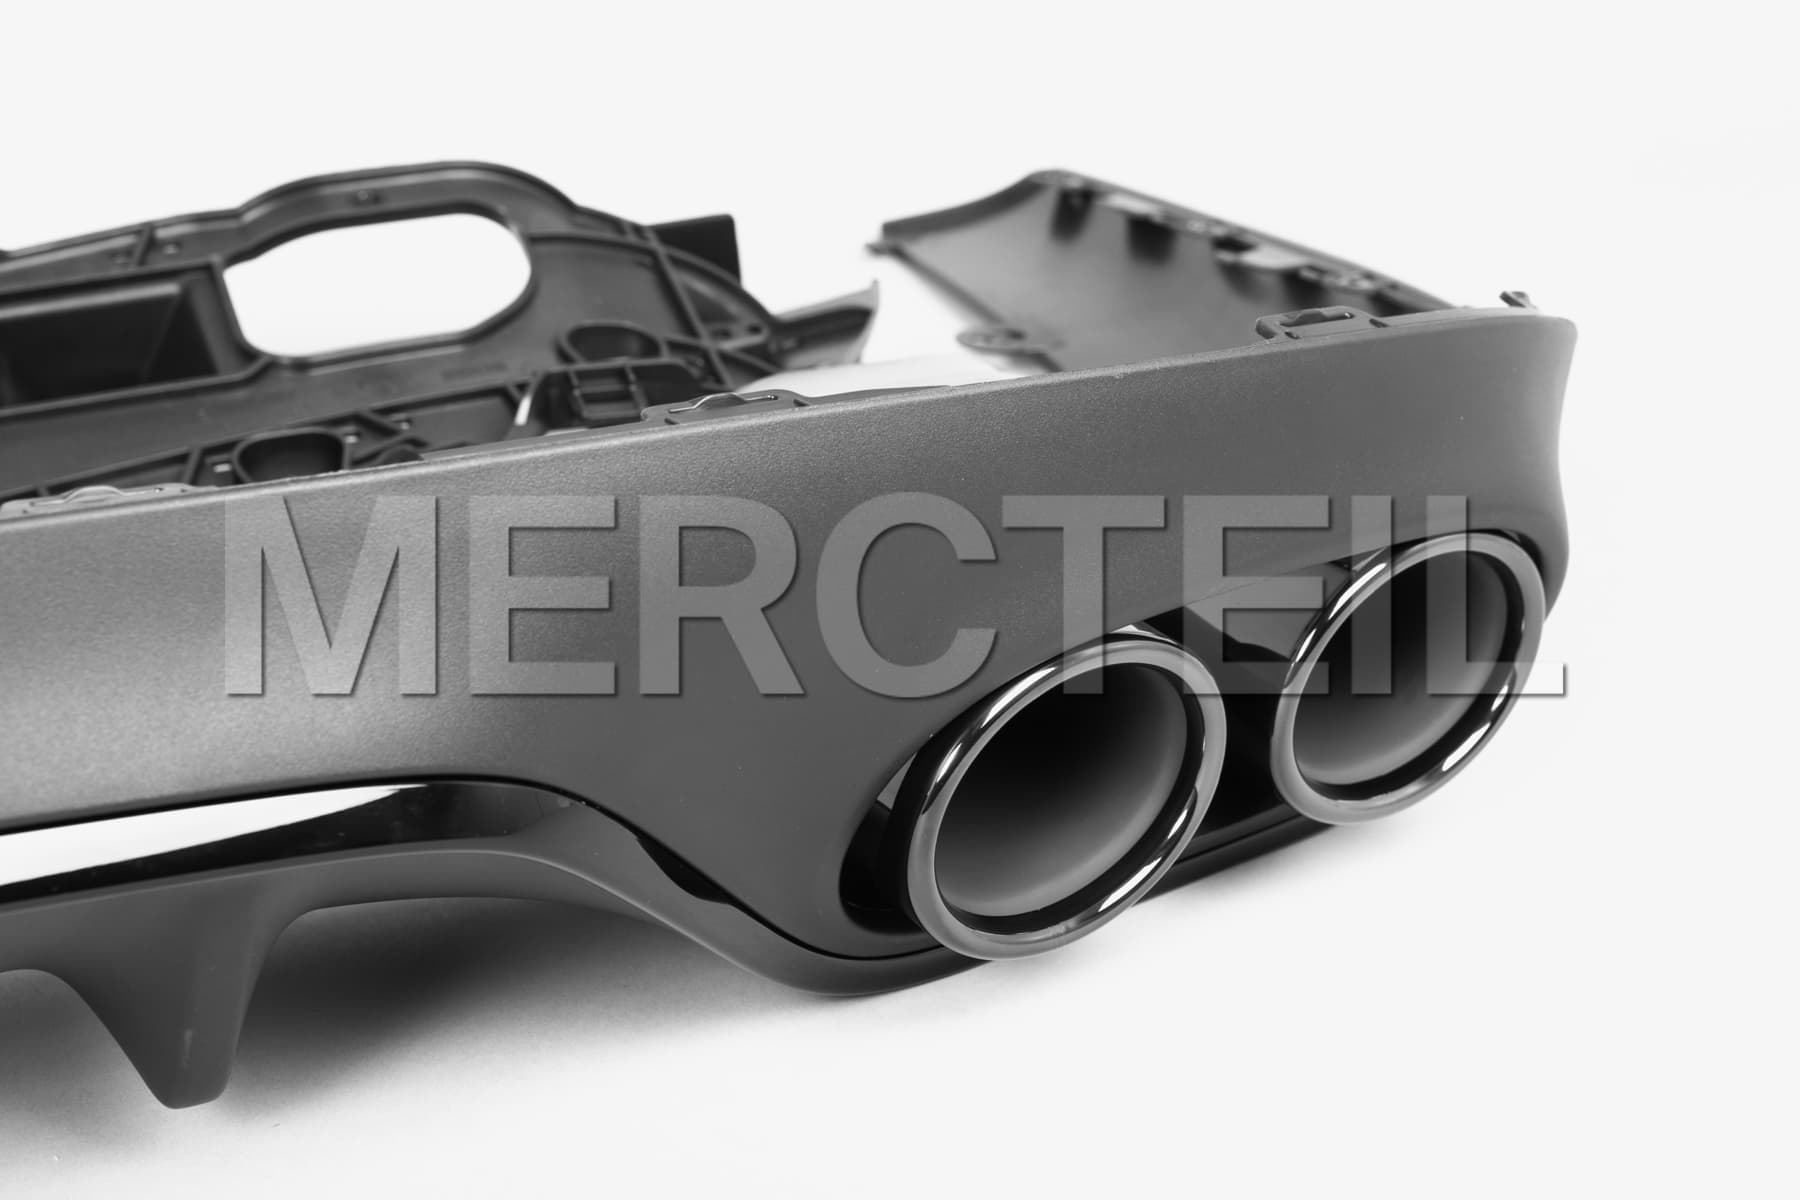 E53 AMG Coupe Rear Diffuser C238 Genuine Mercedes AMG (Part number: A2388852901)